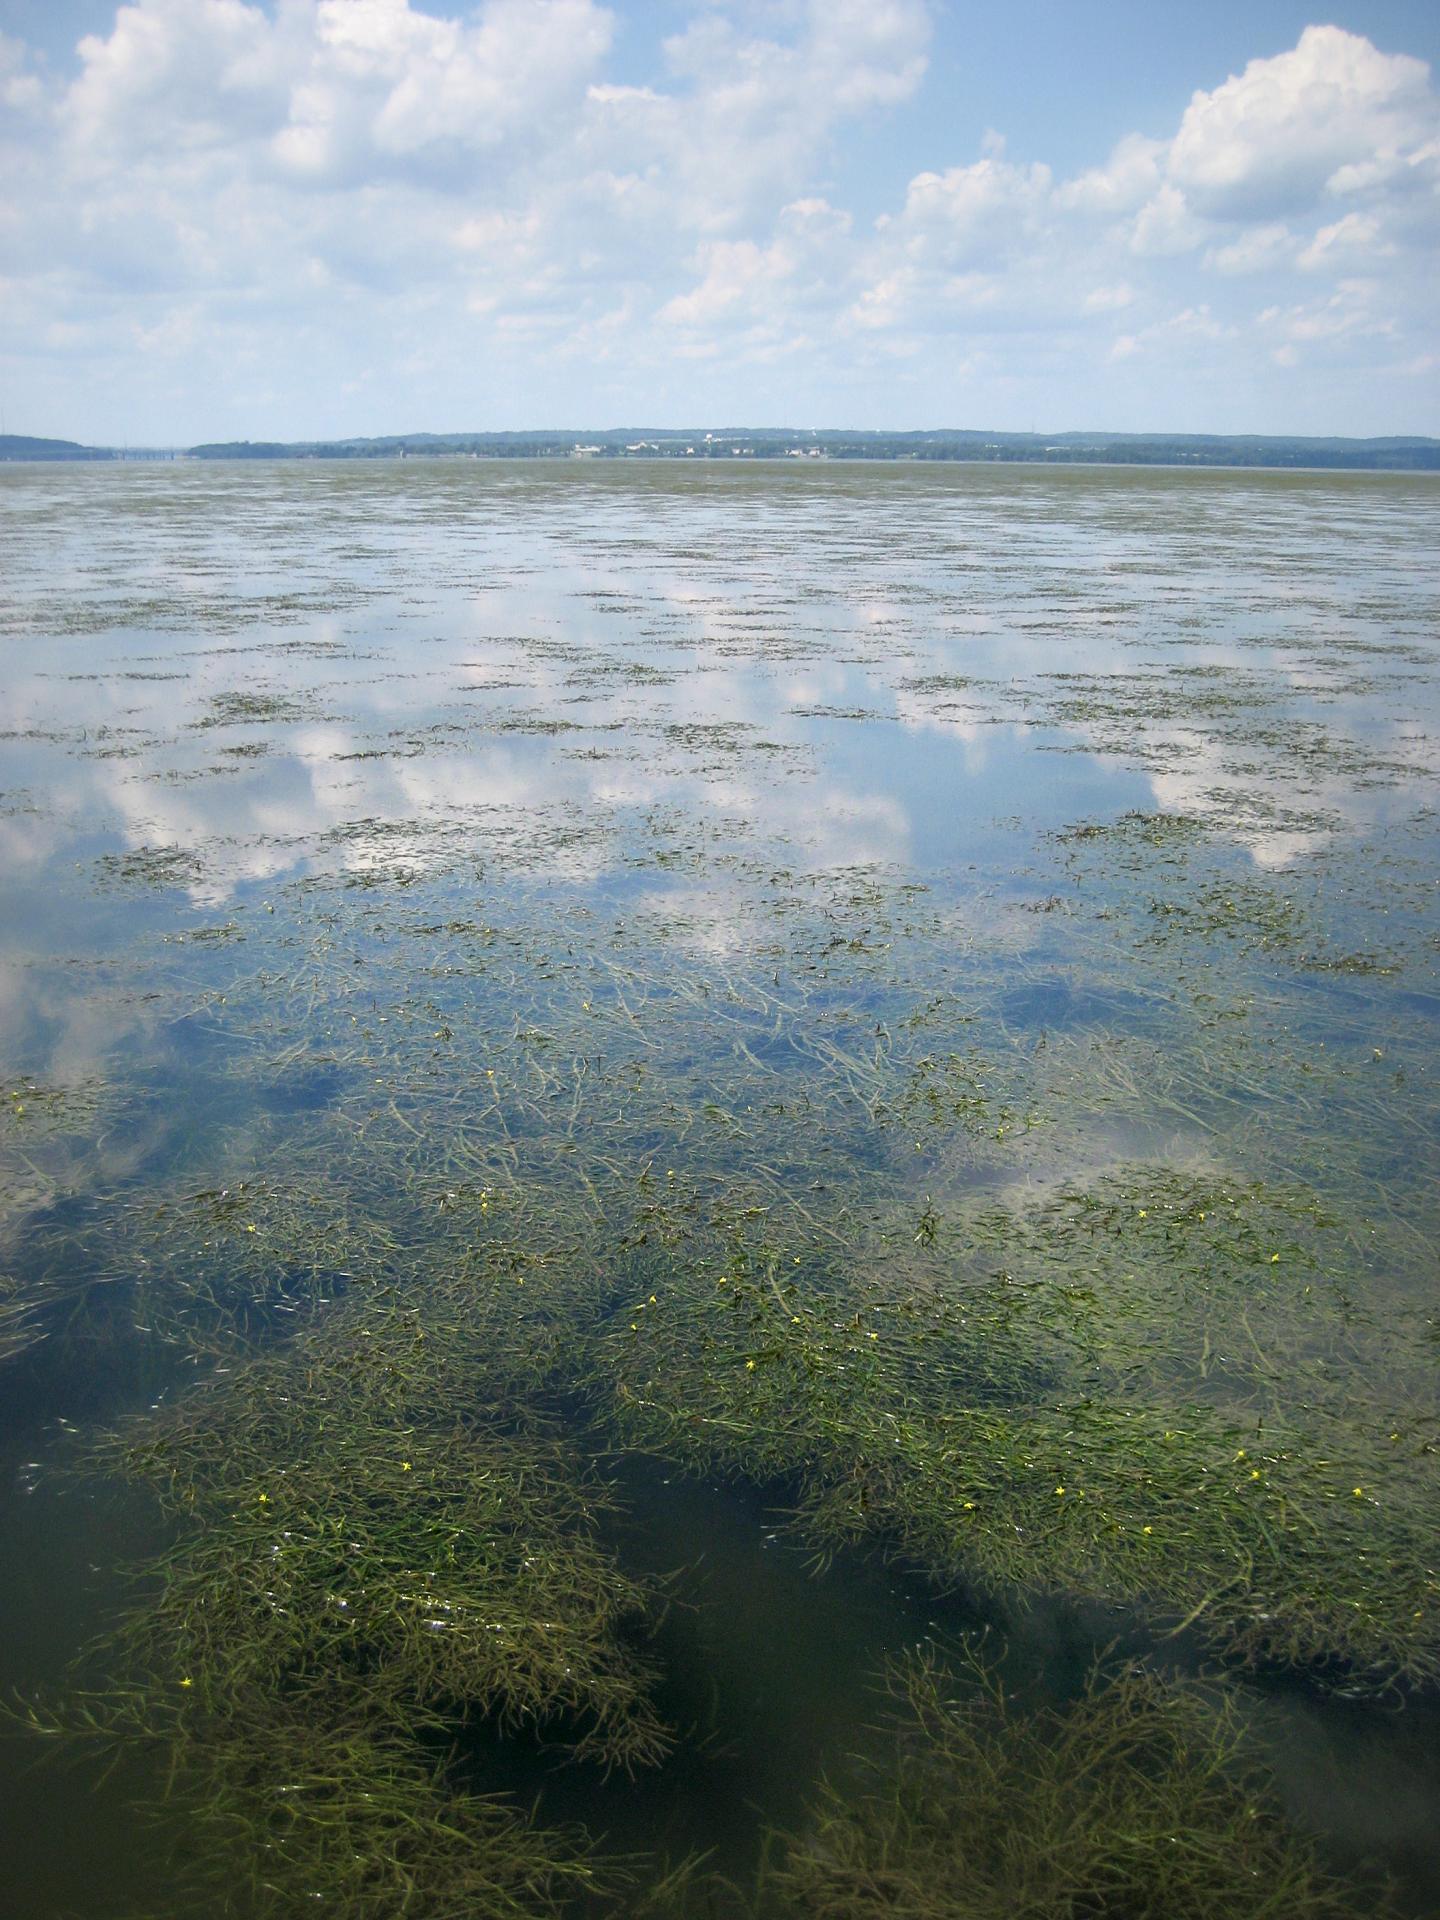 Underwater Grass Beds Have Ability to Protect and Maintain Their Own Health